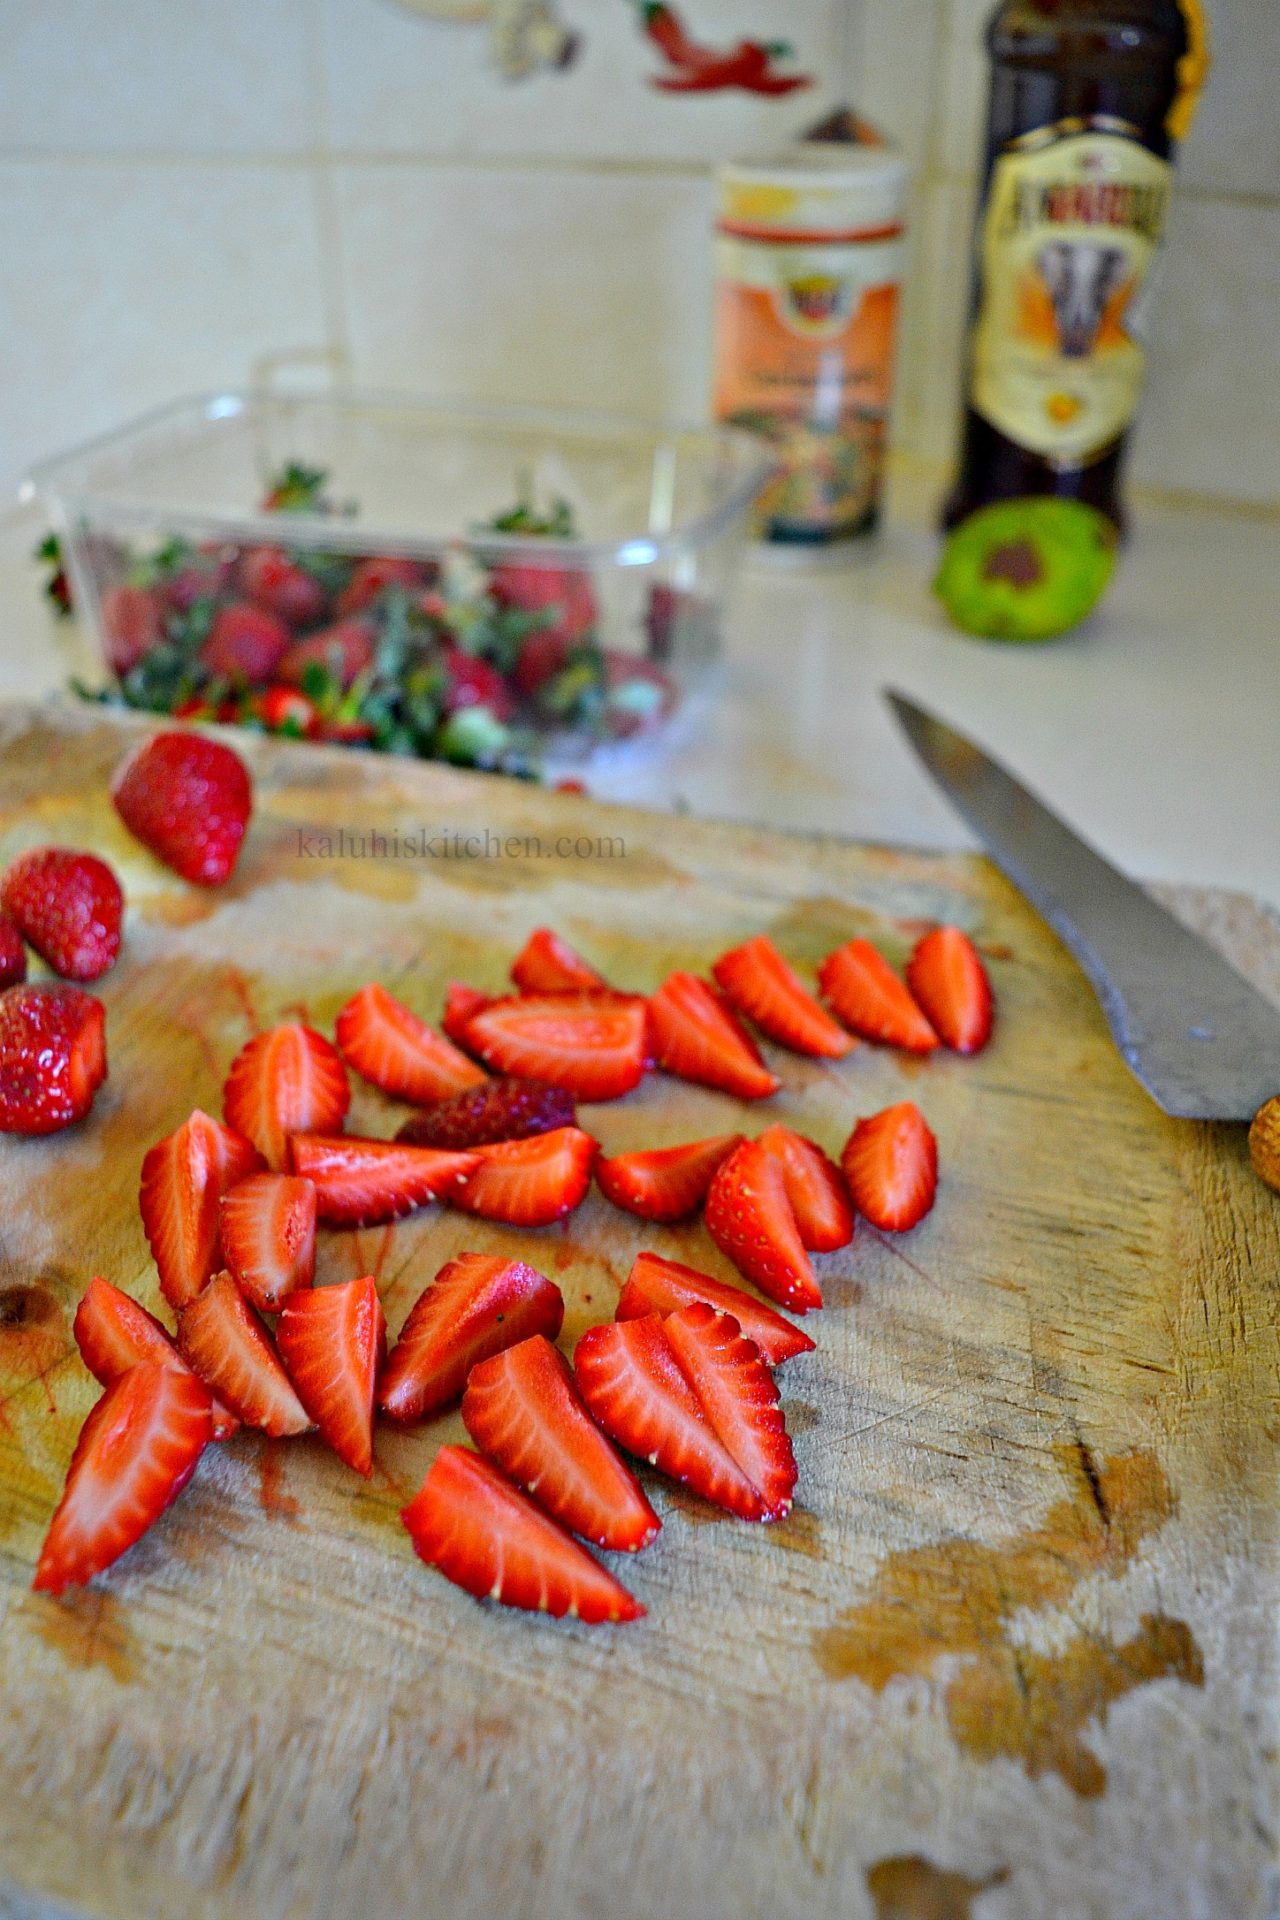 cut the strawberies in quarters so that the macerated strawberies have as much juice as possible